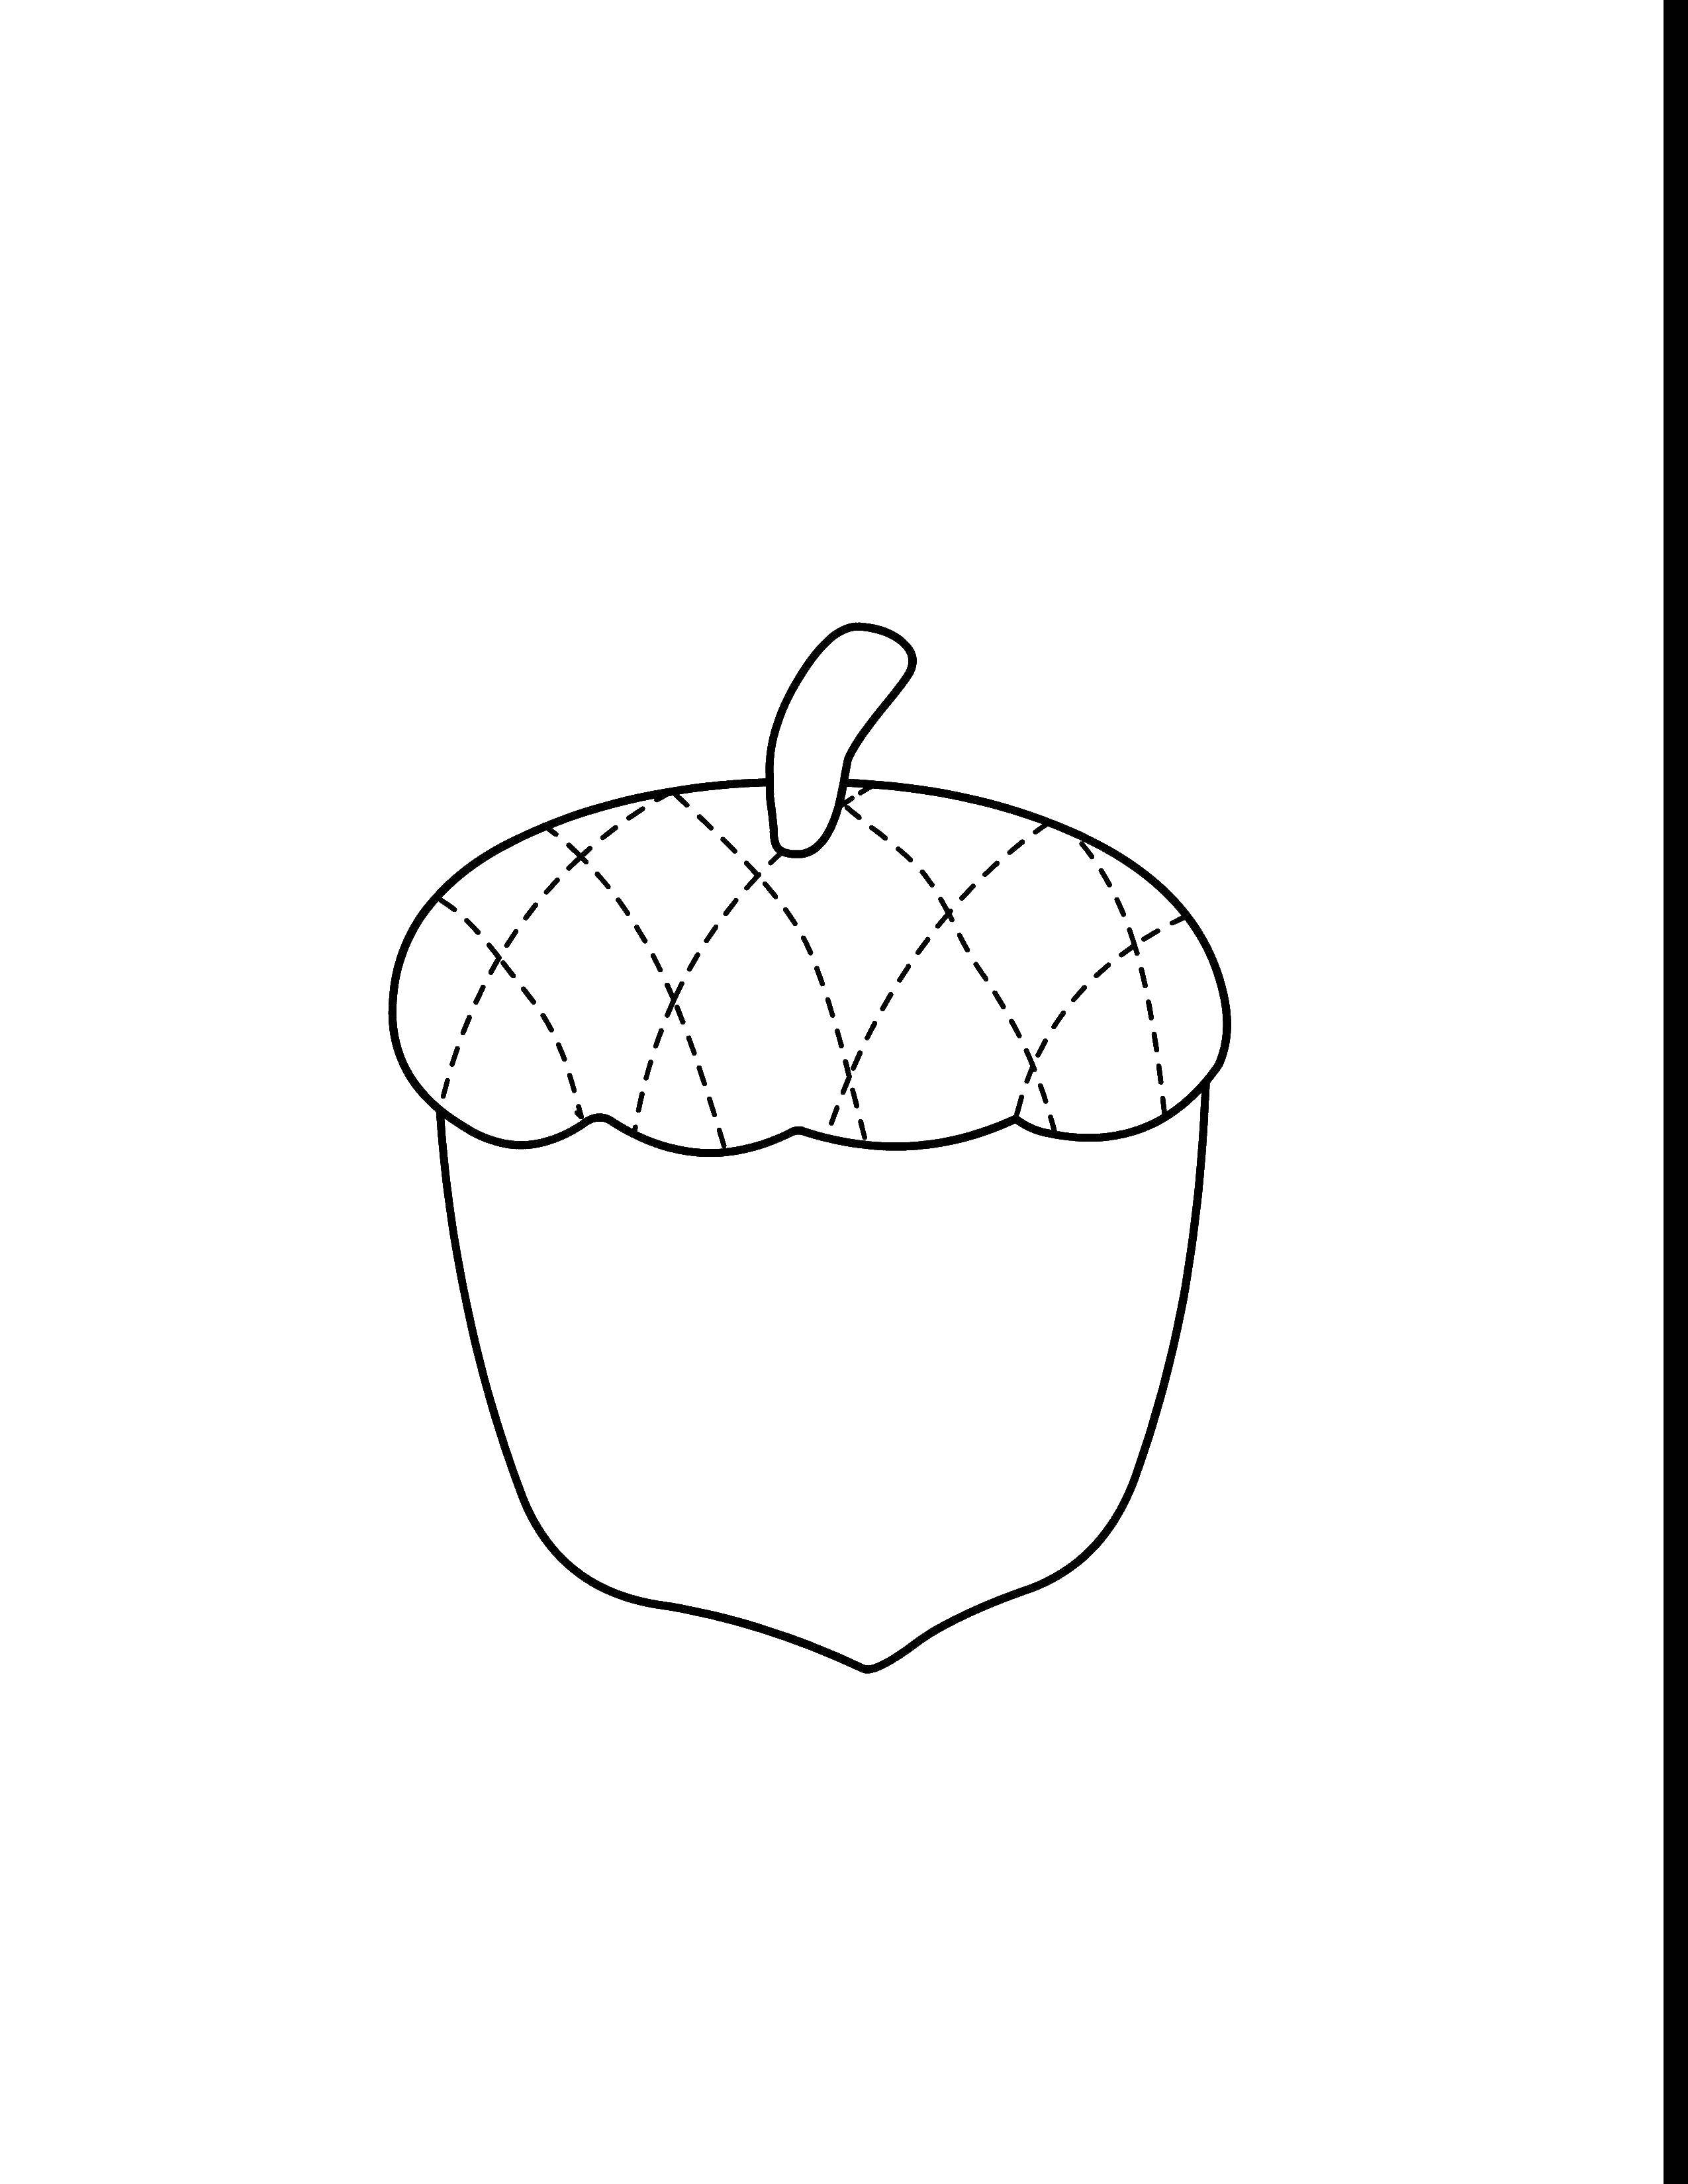 Coloring Acorn. Category The plant. Tags:  plant, acorn.